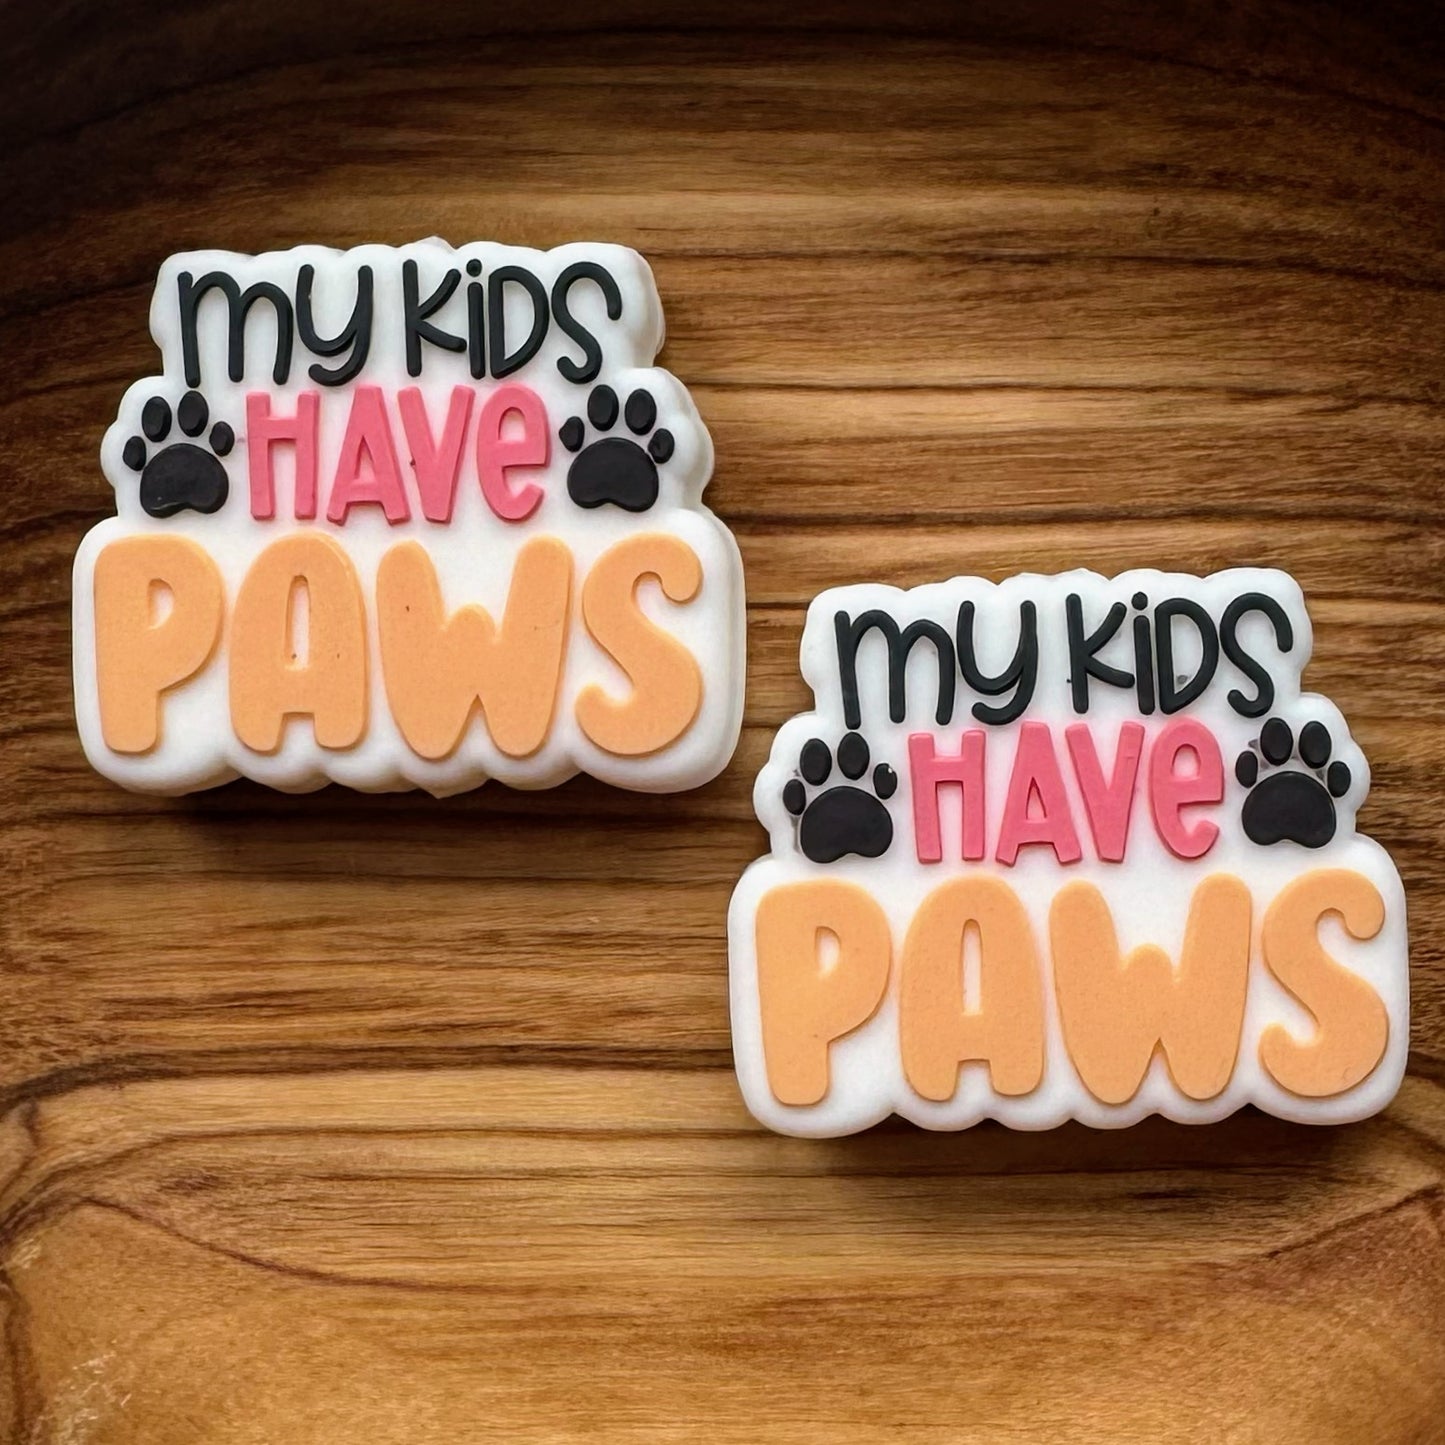 My Kids Have Paws Focal